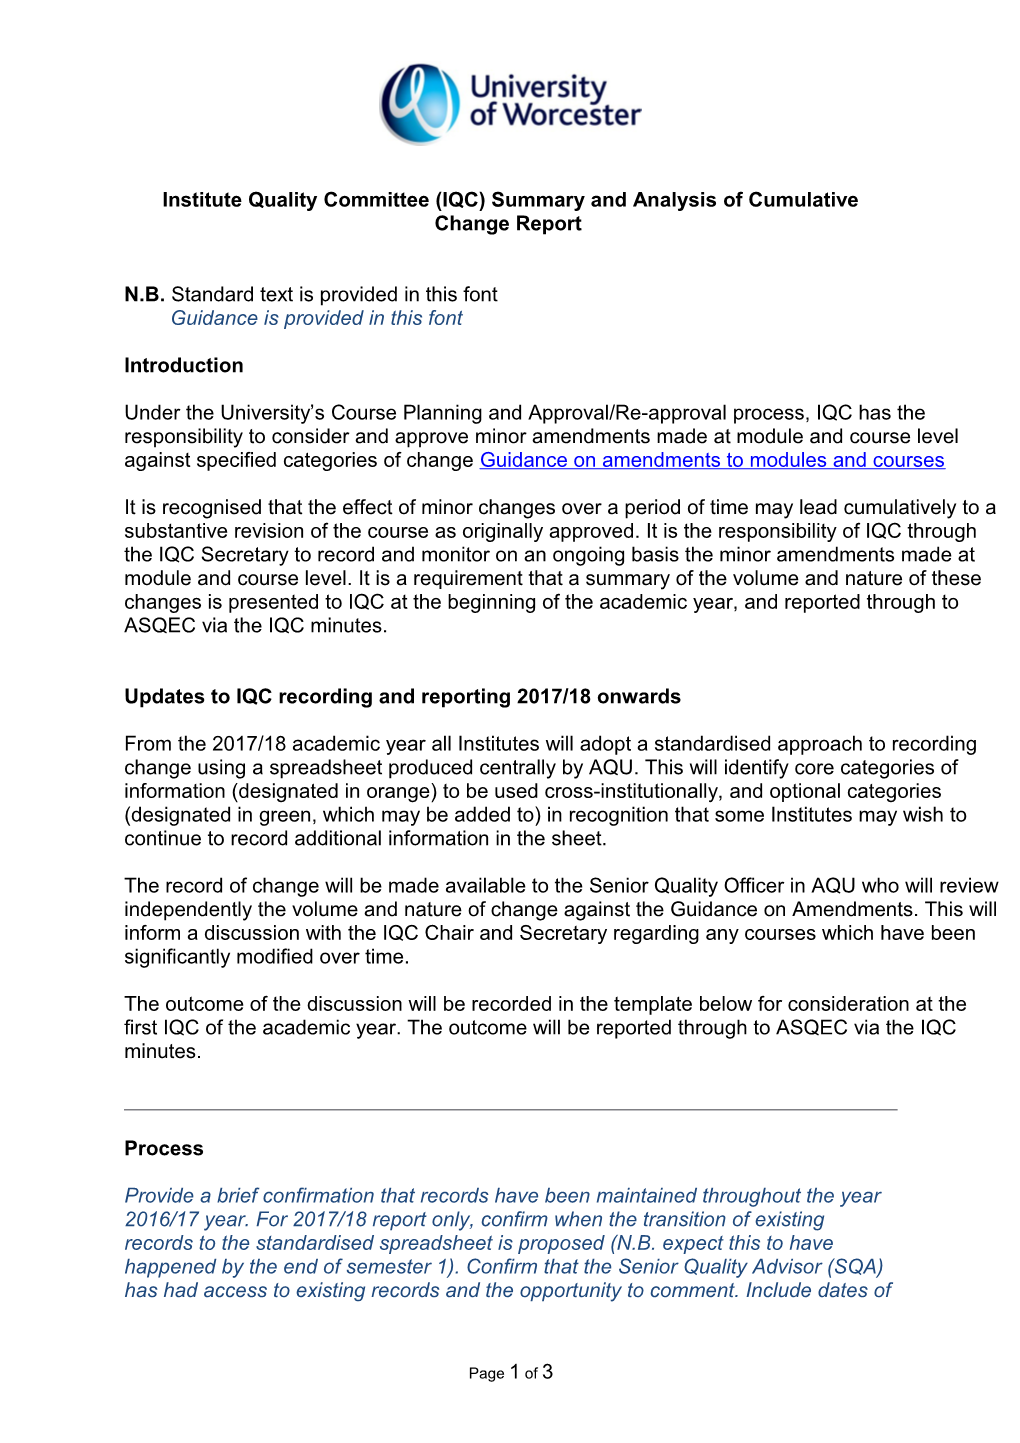 Institute Quality Committee (IQC)Summary and Analysis of Cumulative Changereport